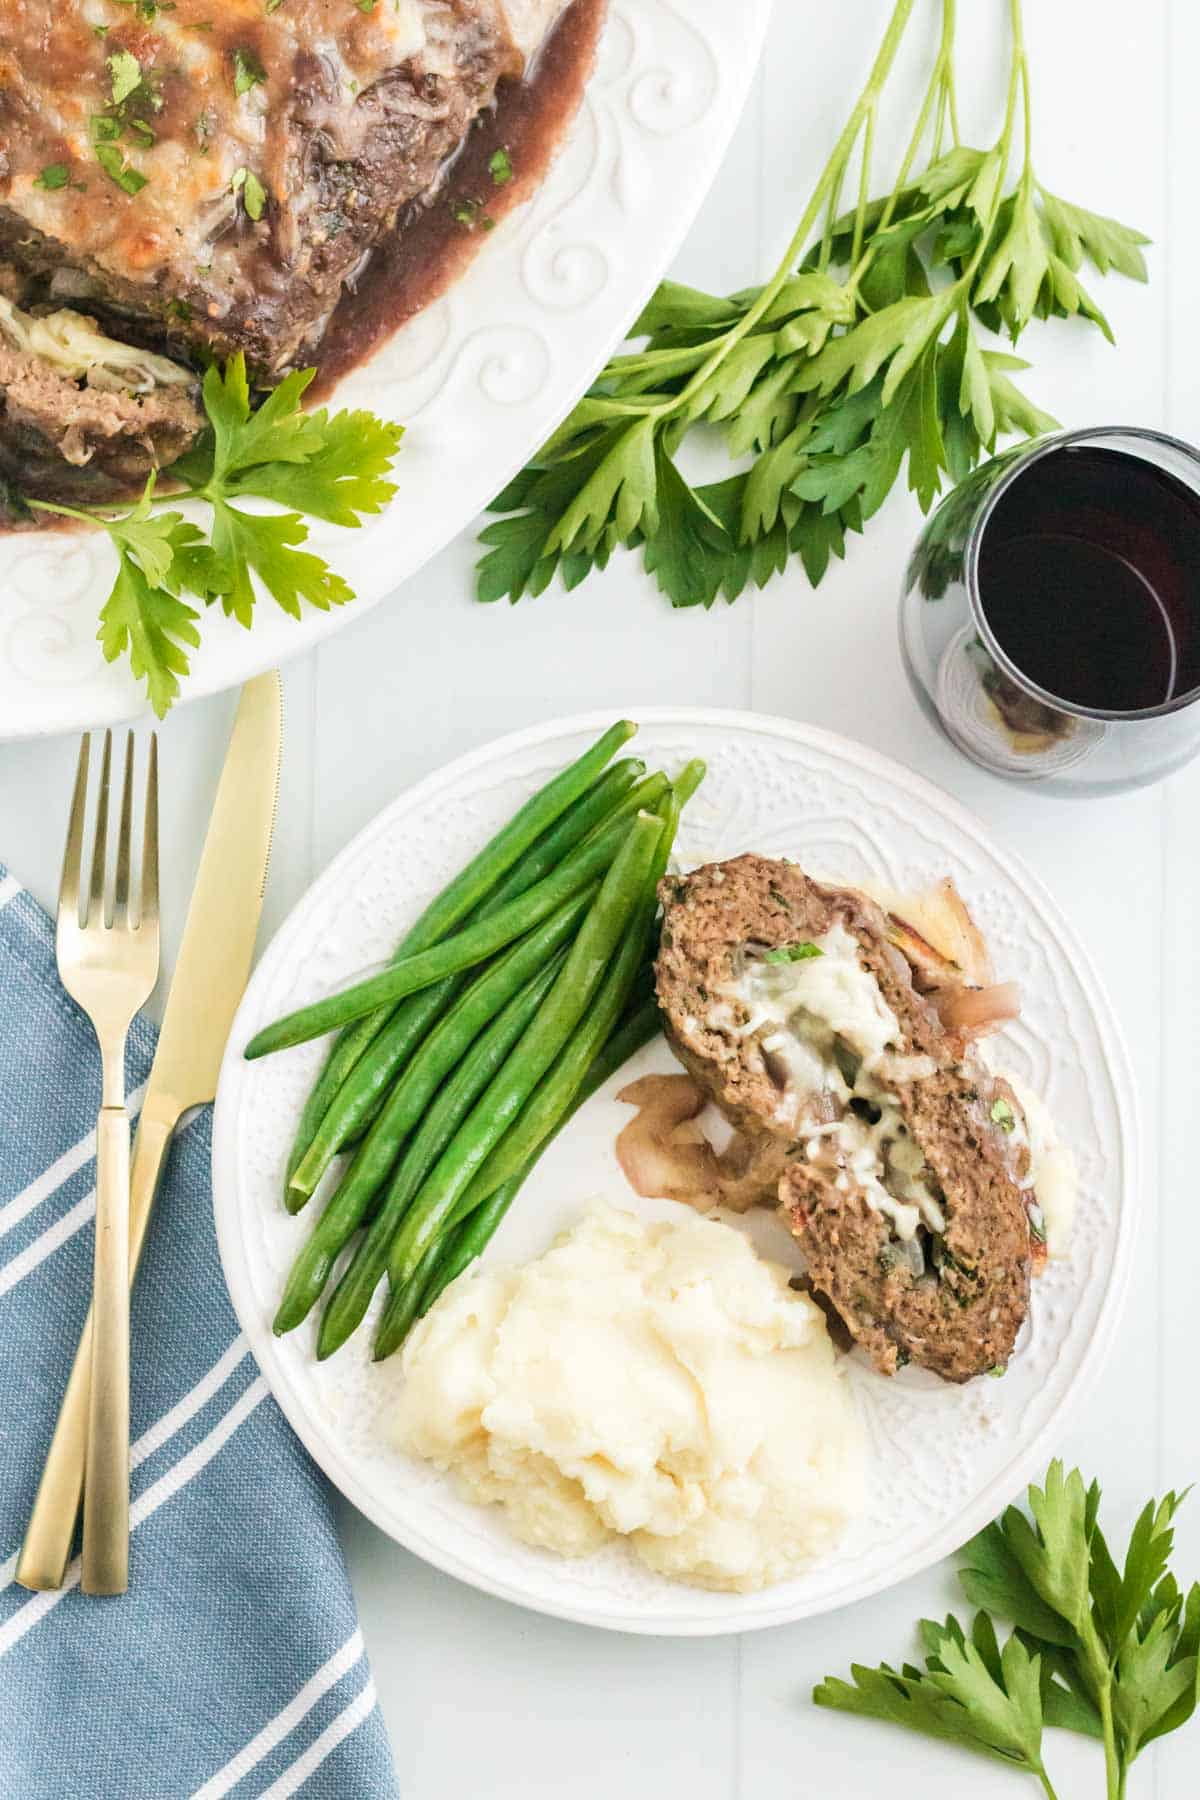 A serving of French onion stuffed meatloaf on a plate with veggies and potatoes beside a knife and fork